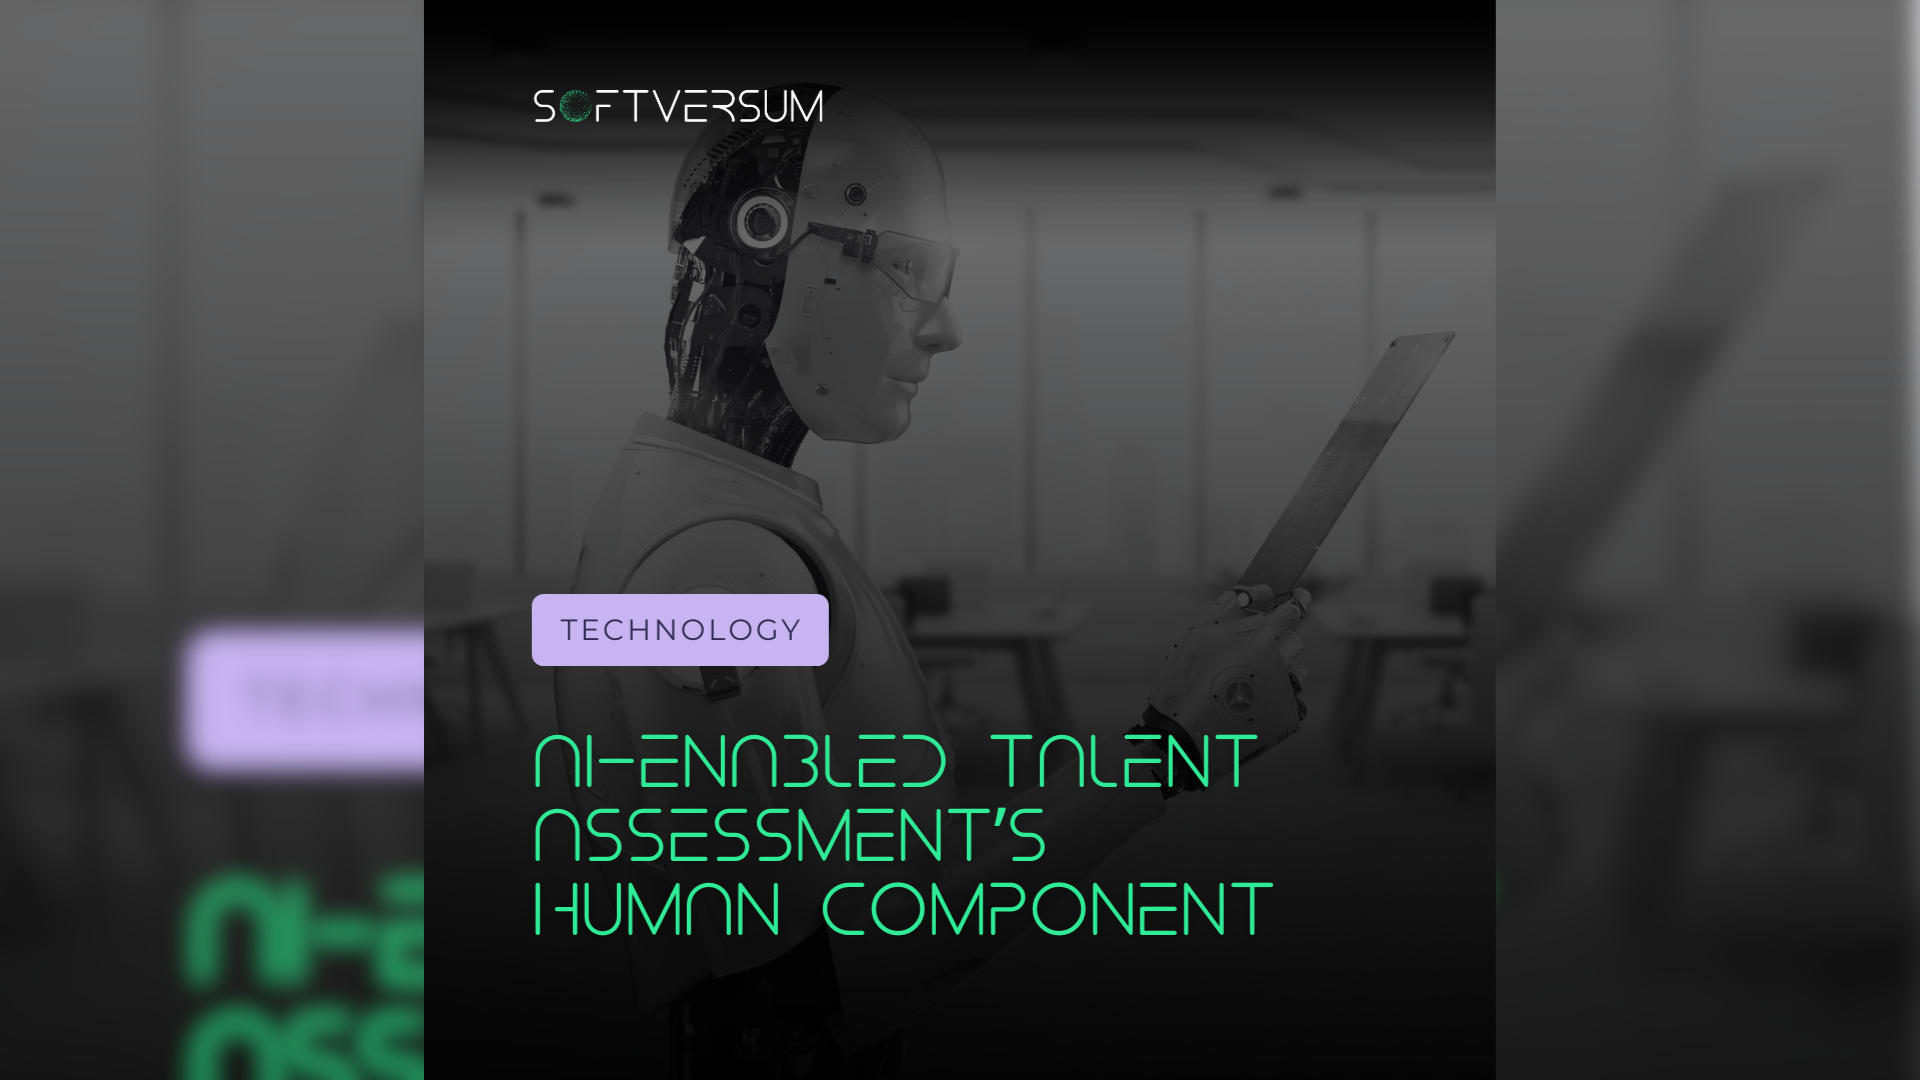 AI-ENABLED TALENT ASSESSMENT’S HUMAN COMPONENT: THE POWER OF SYNERGY